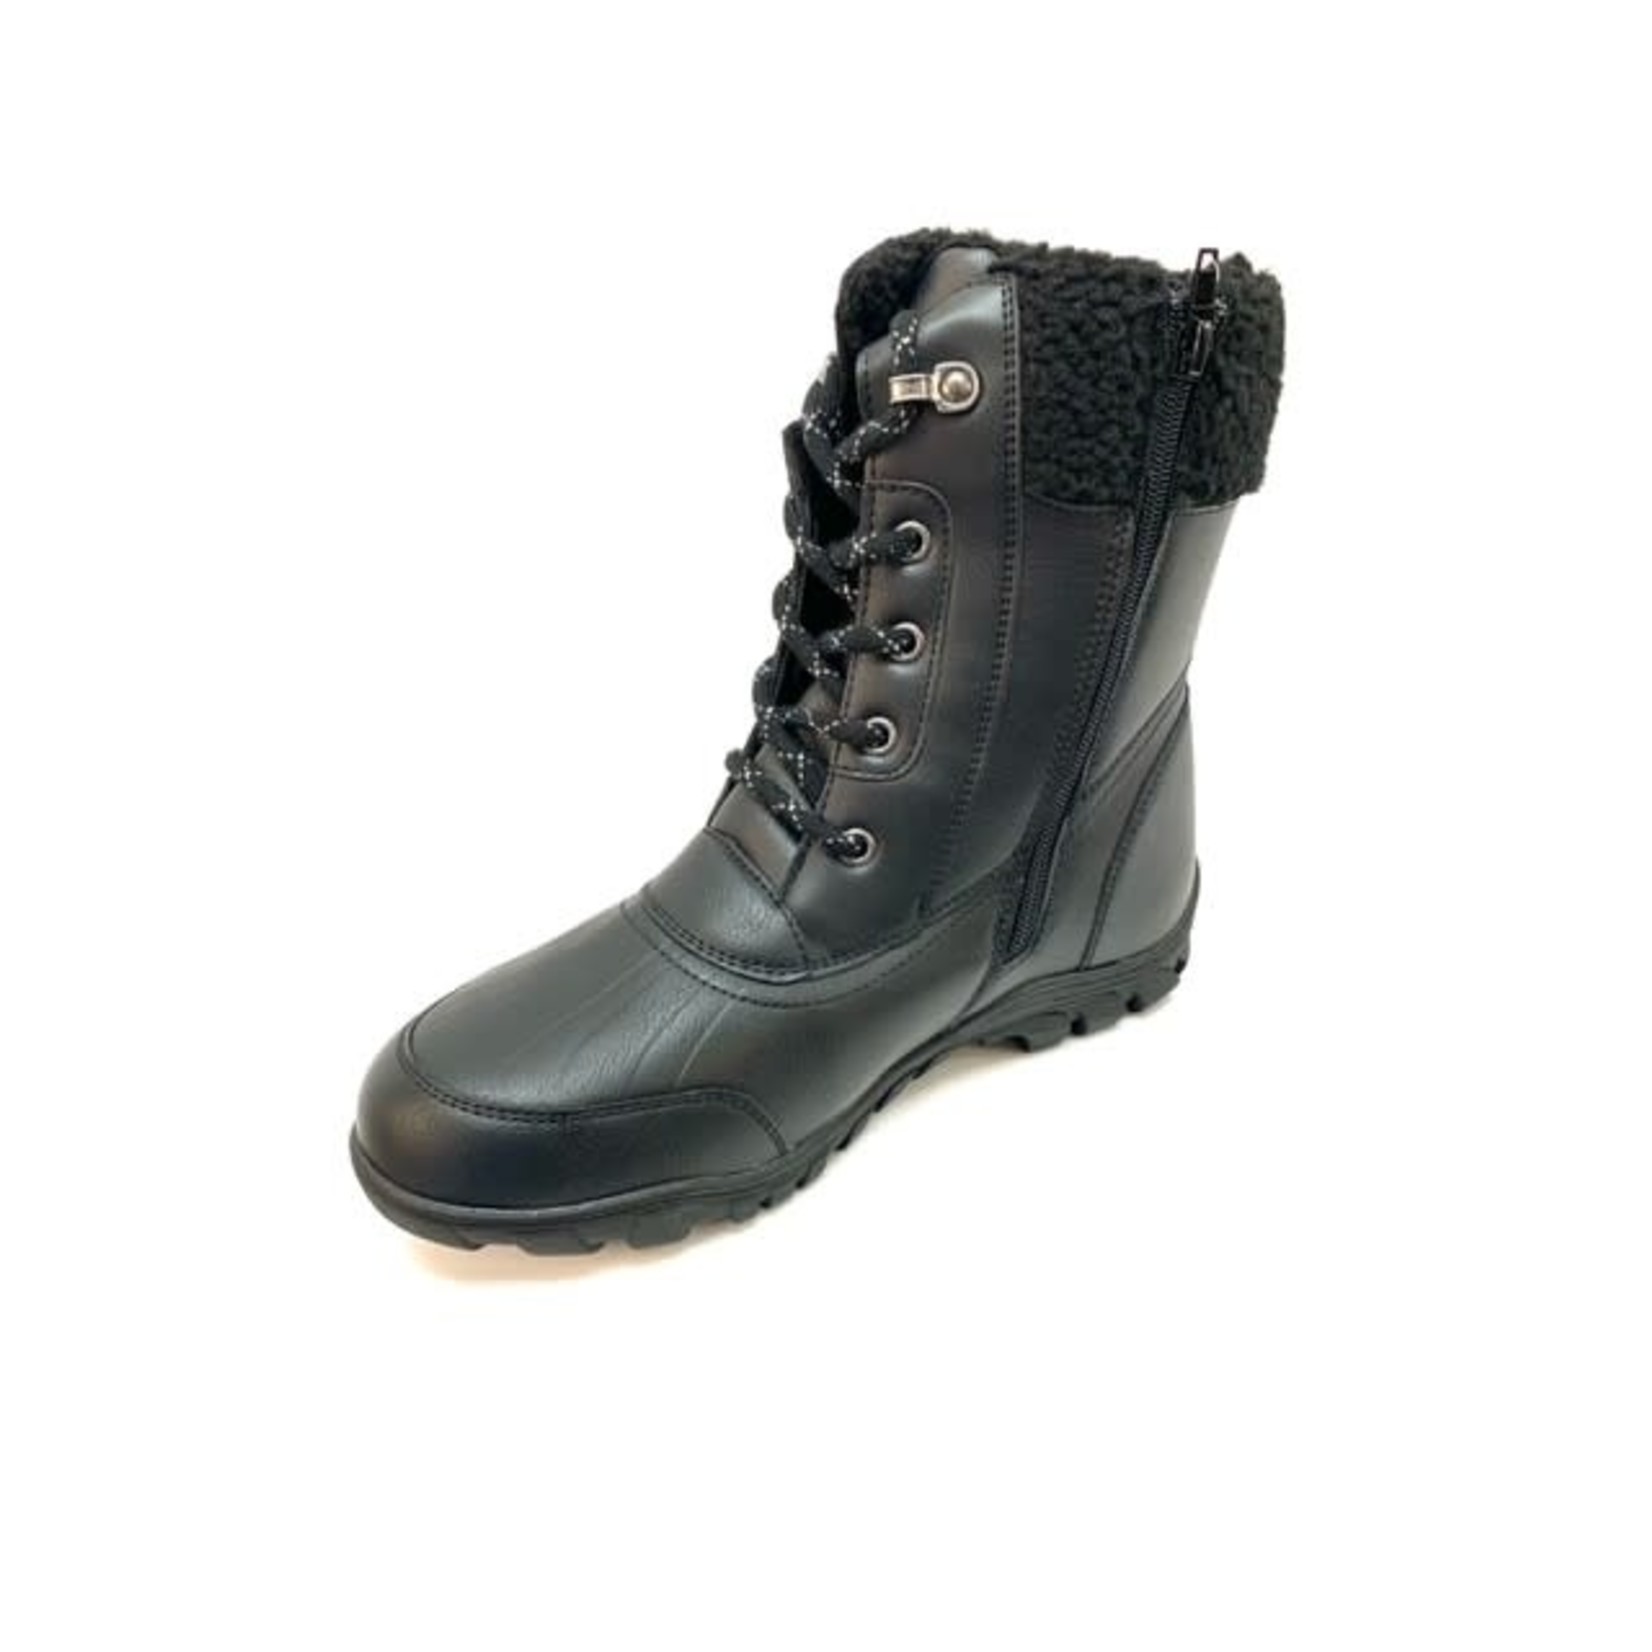 Xtra Dry ladies Waterproof boot, womans boots, footwear, boots